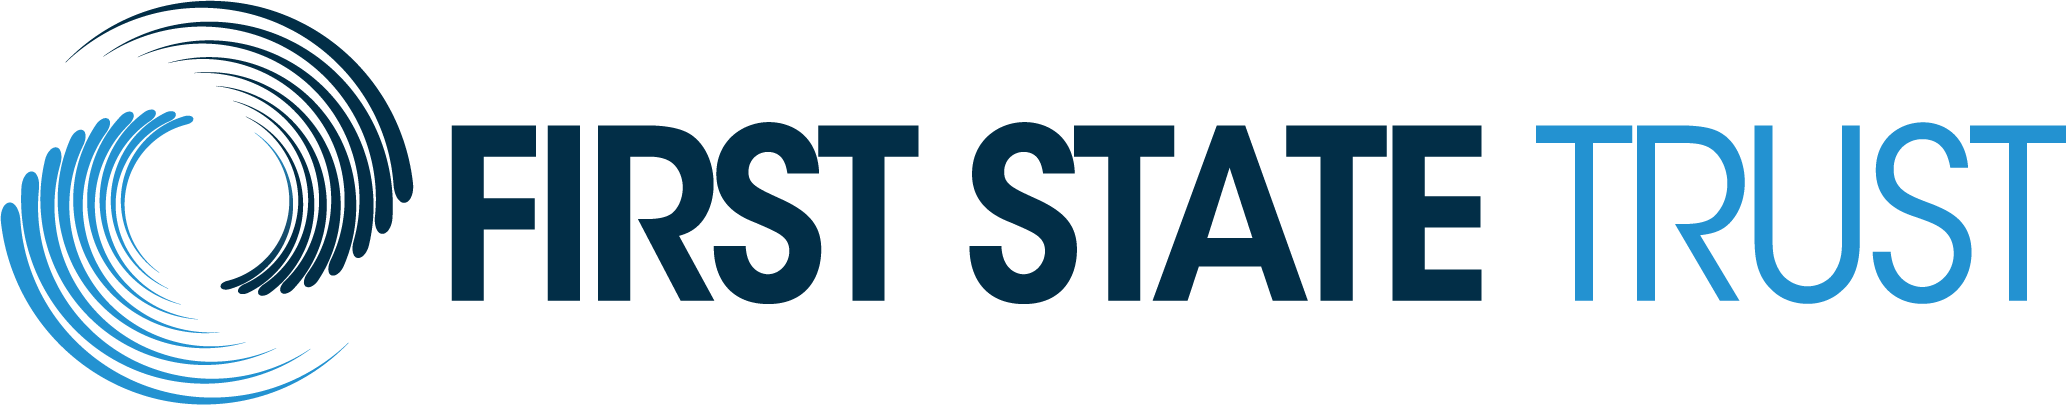 First State Trust Company